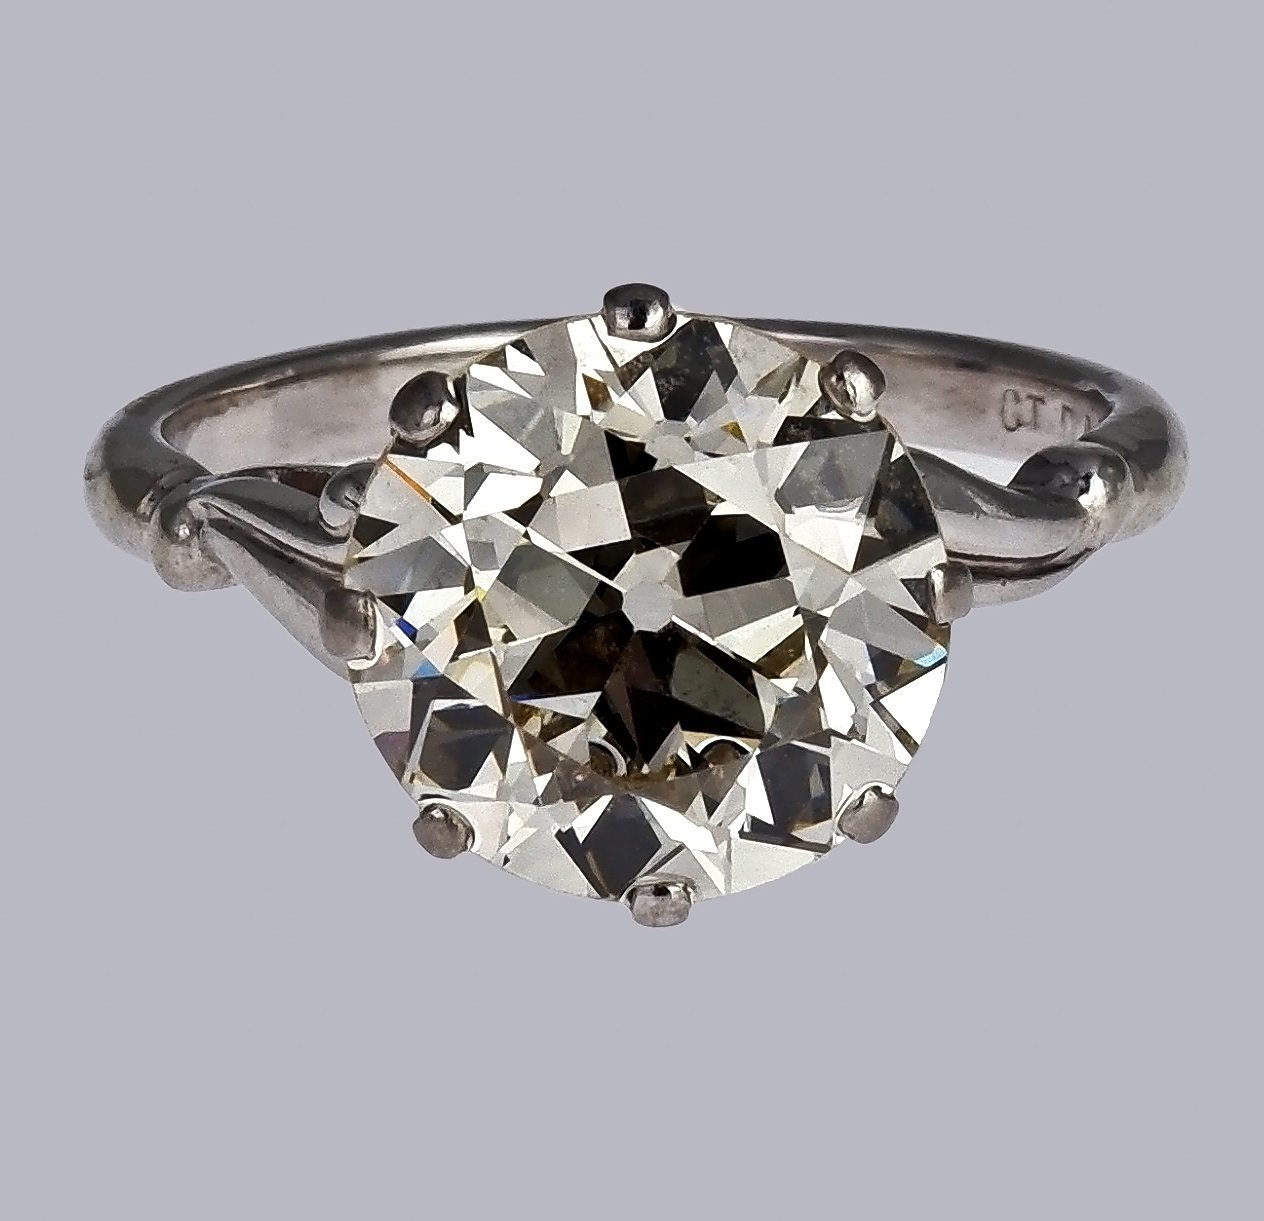 'An Exceptional 18ct Palladium White Gold and 3.10ct Old European Cut Diamond Solitaire Ring'